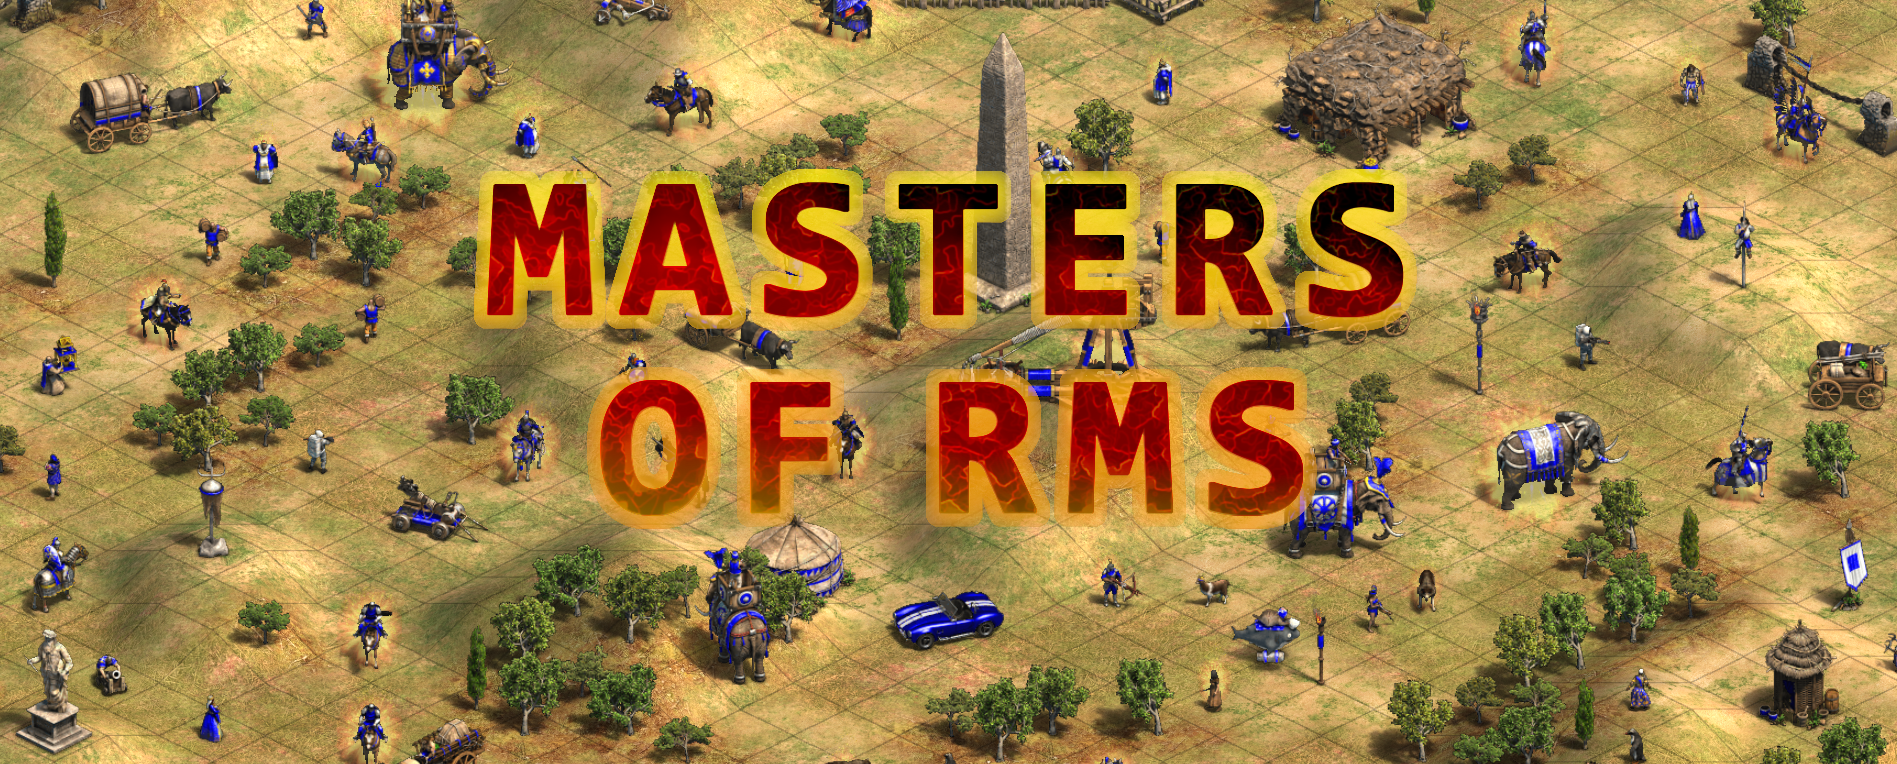 Masters of RMS logo.png